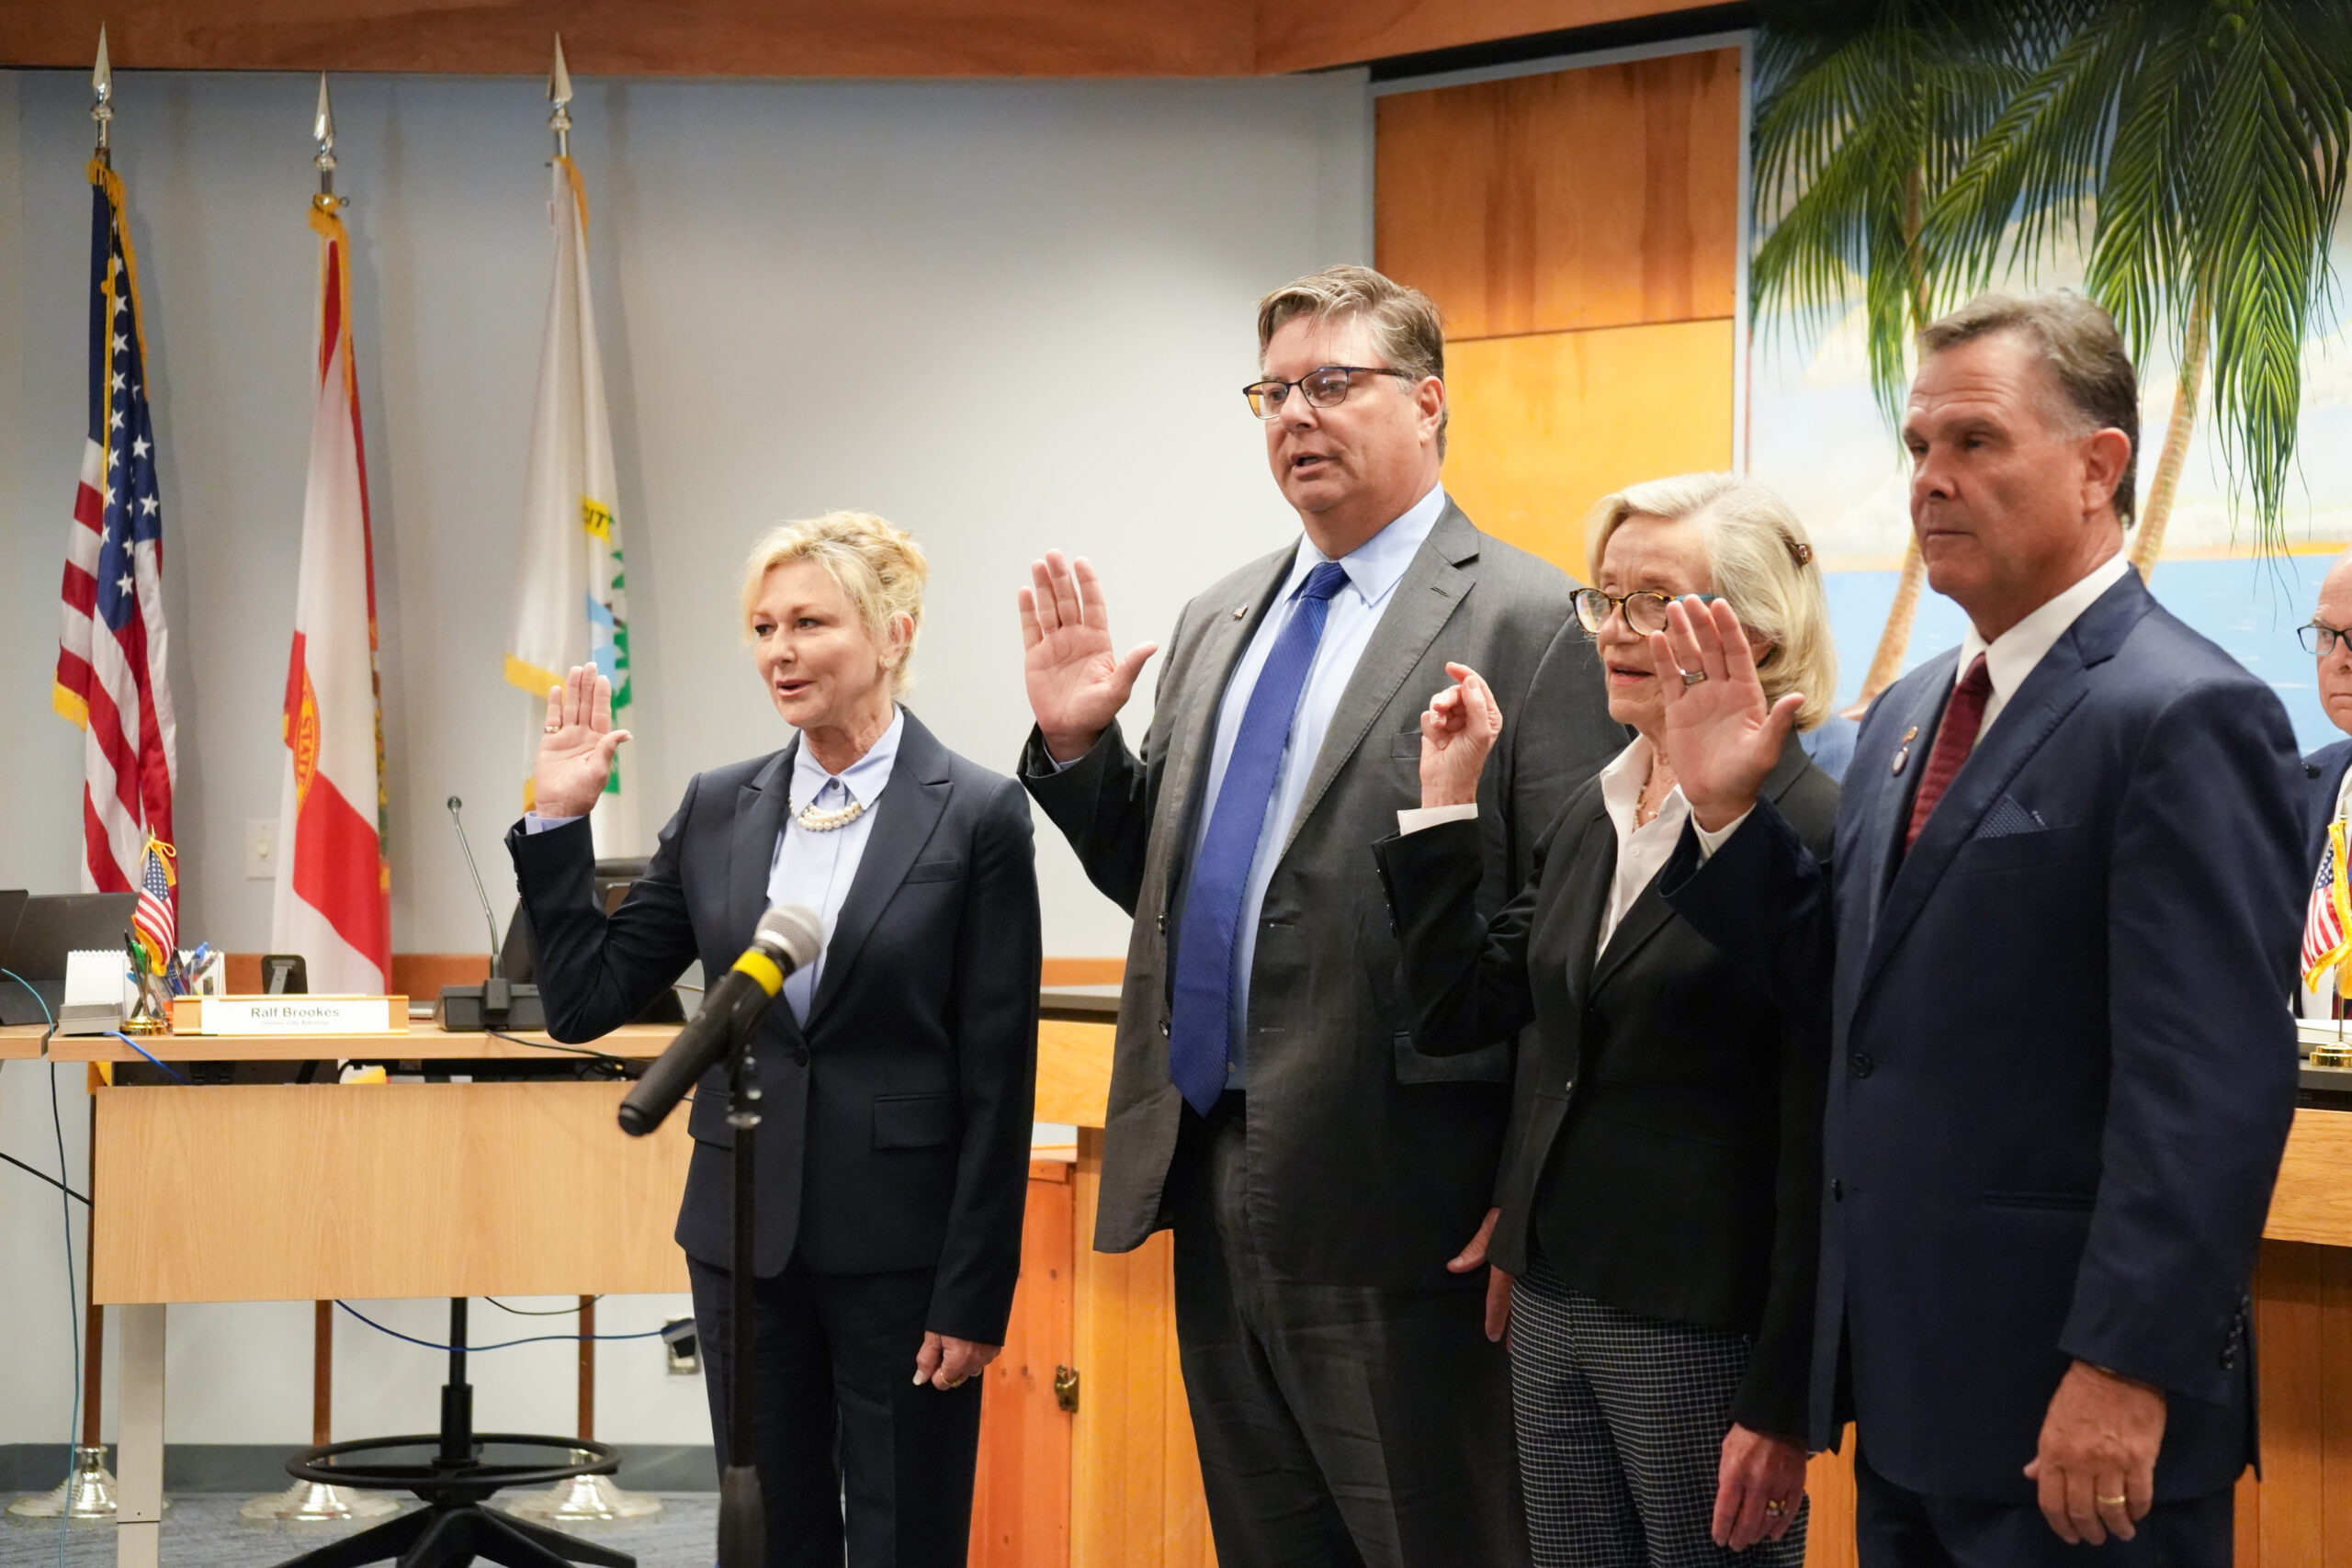 New Naples City Council members are sworn in.